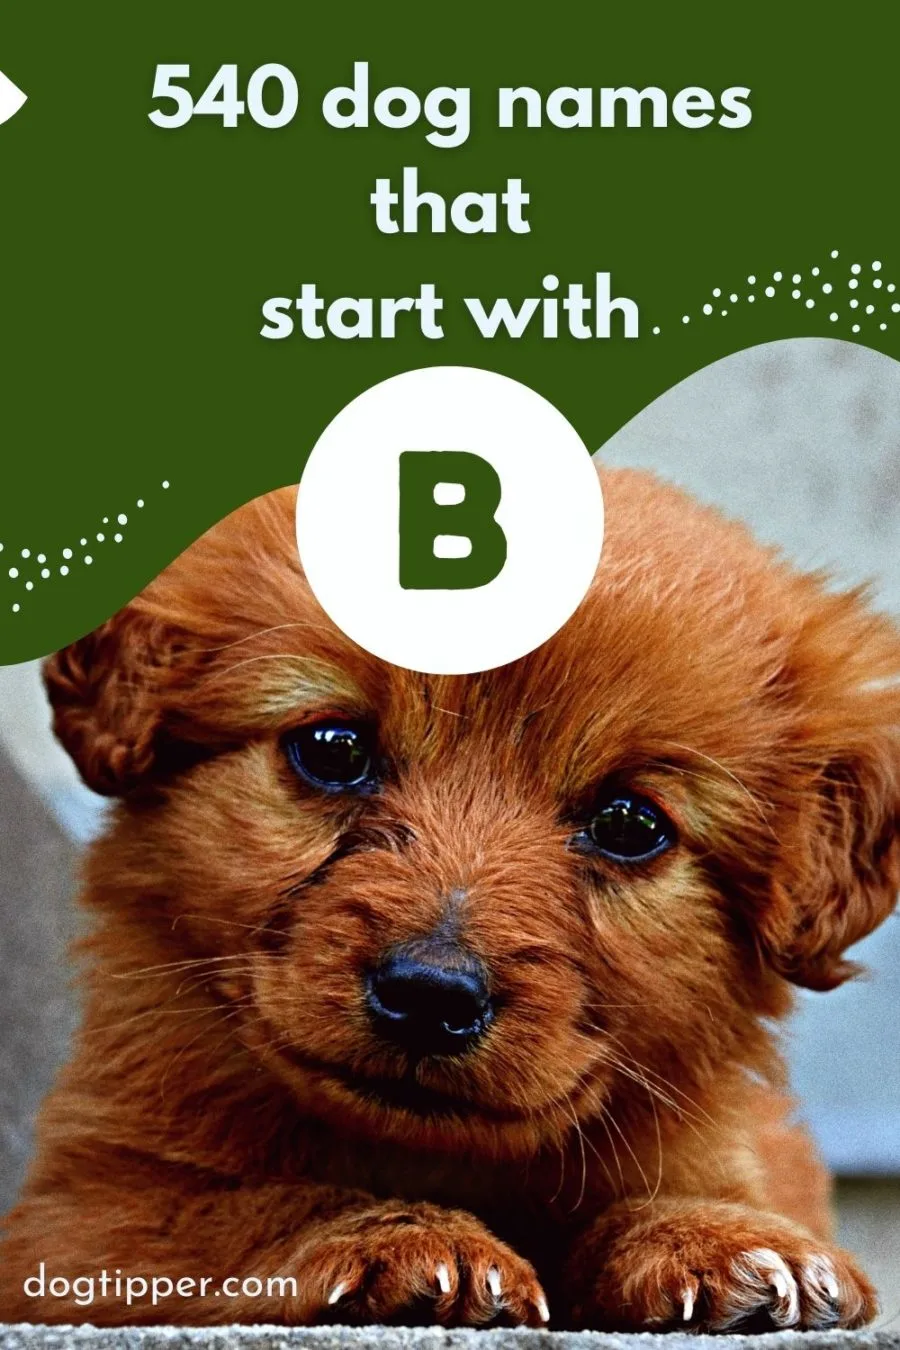 540 dog names that start with B